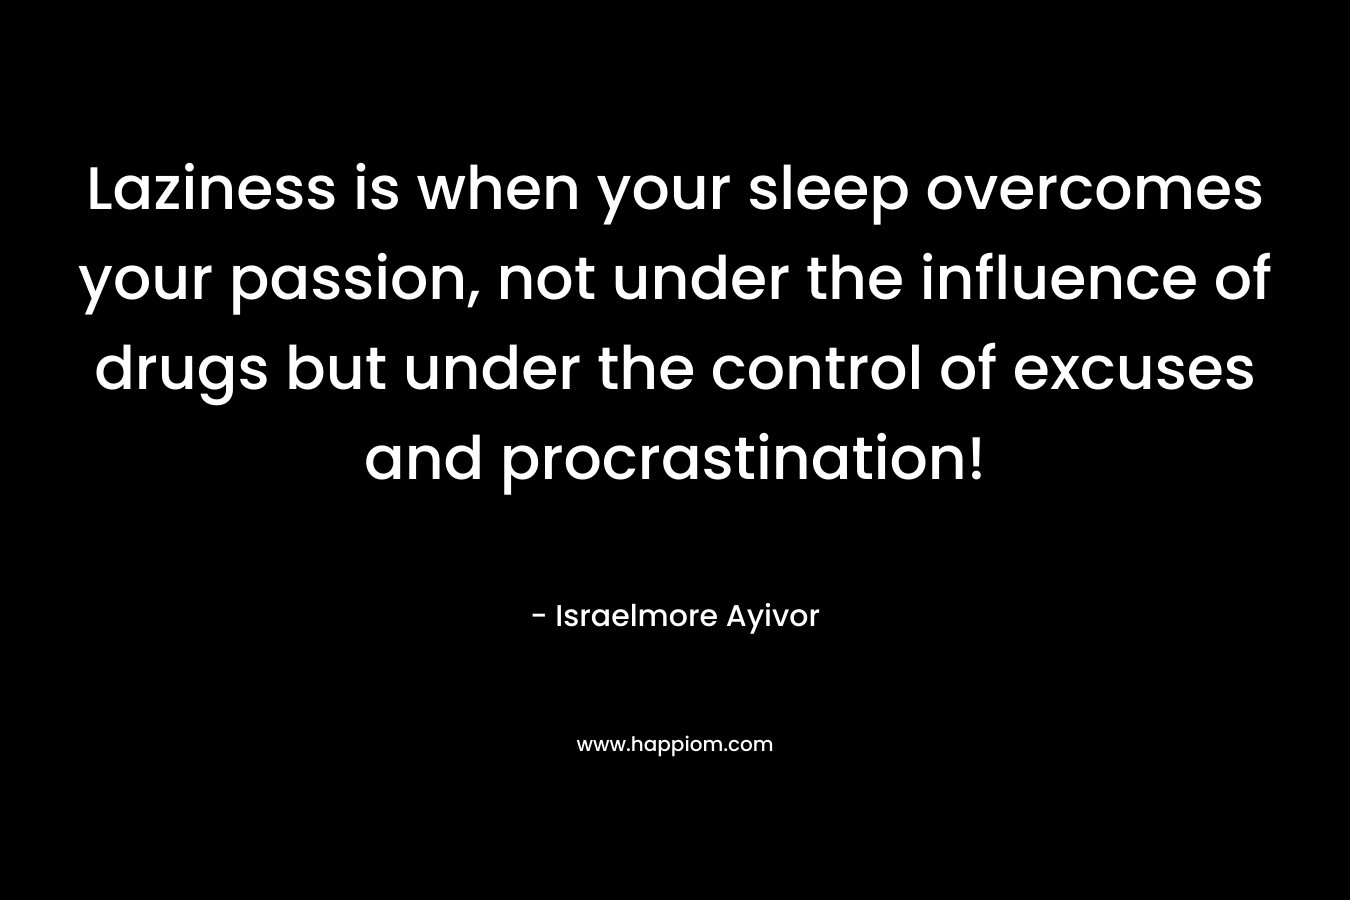 Laziness is when your sleep overcomes your passion, not under the influence of drugs but under the control of excuses and procrastination!